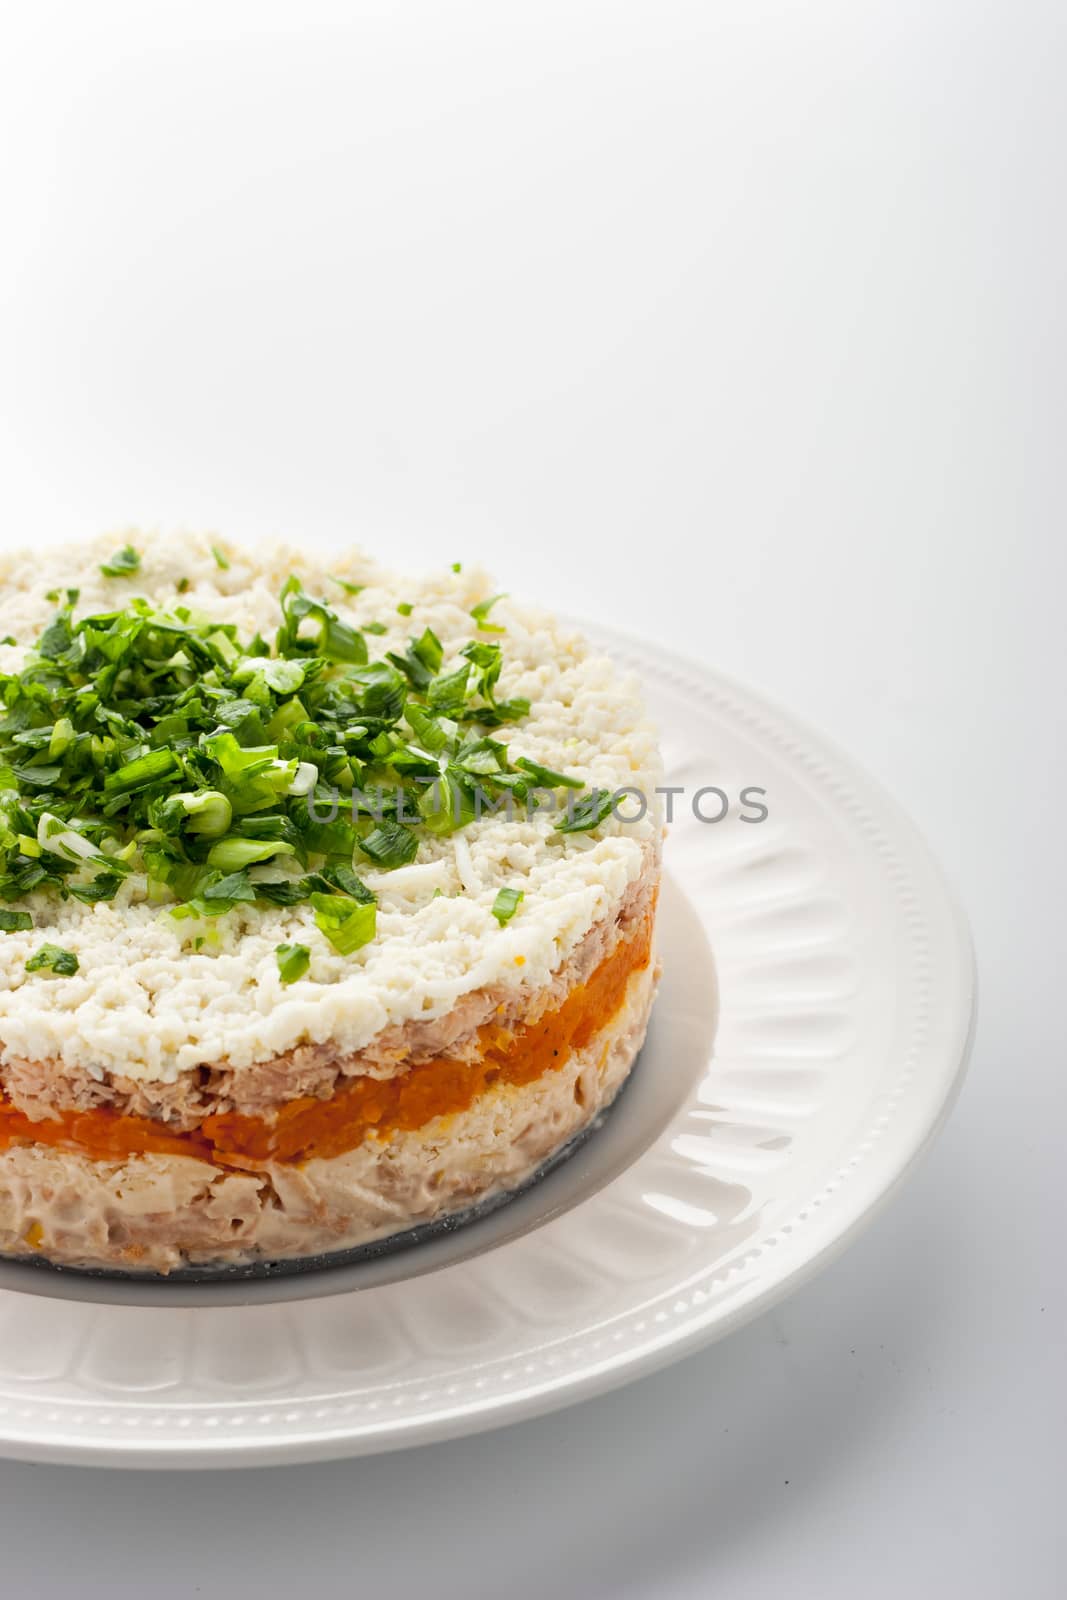 Layered salad with eggs and fish on the white ceramic plate vertical